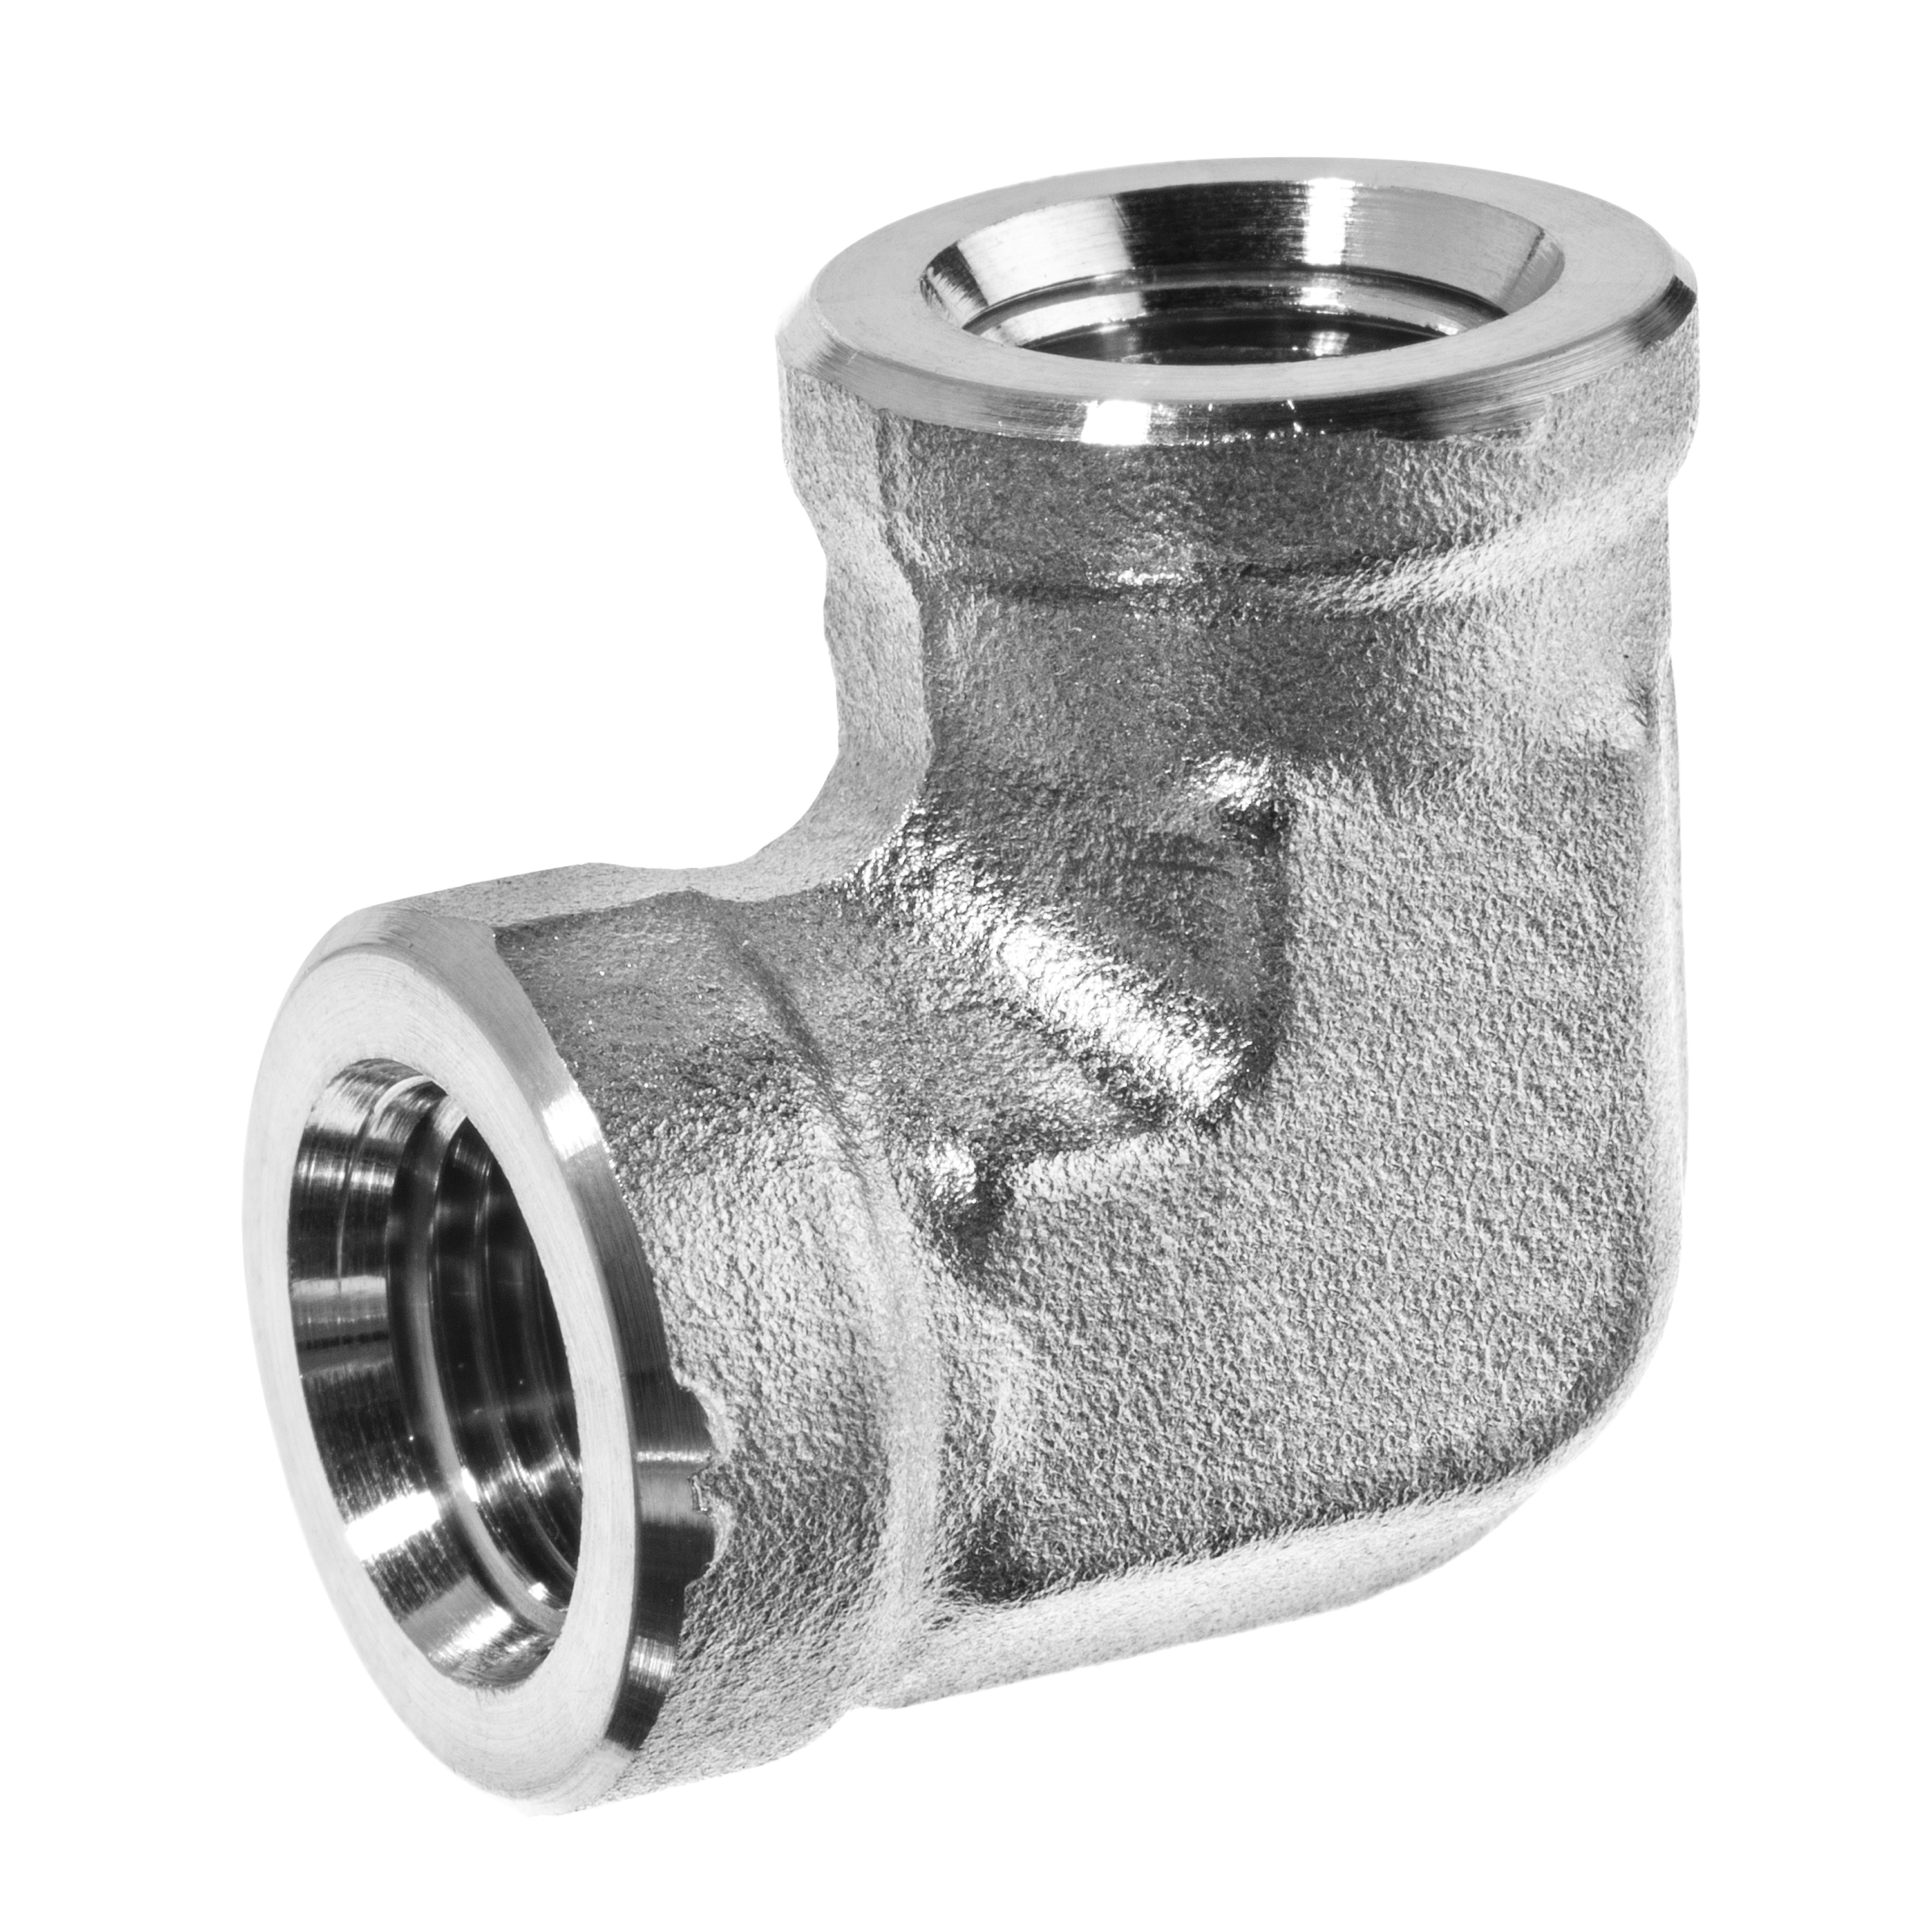 Pipe Fitting - Elbow, Female BSPT, 316 Stainless Steel, Class 150